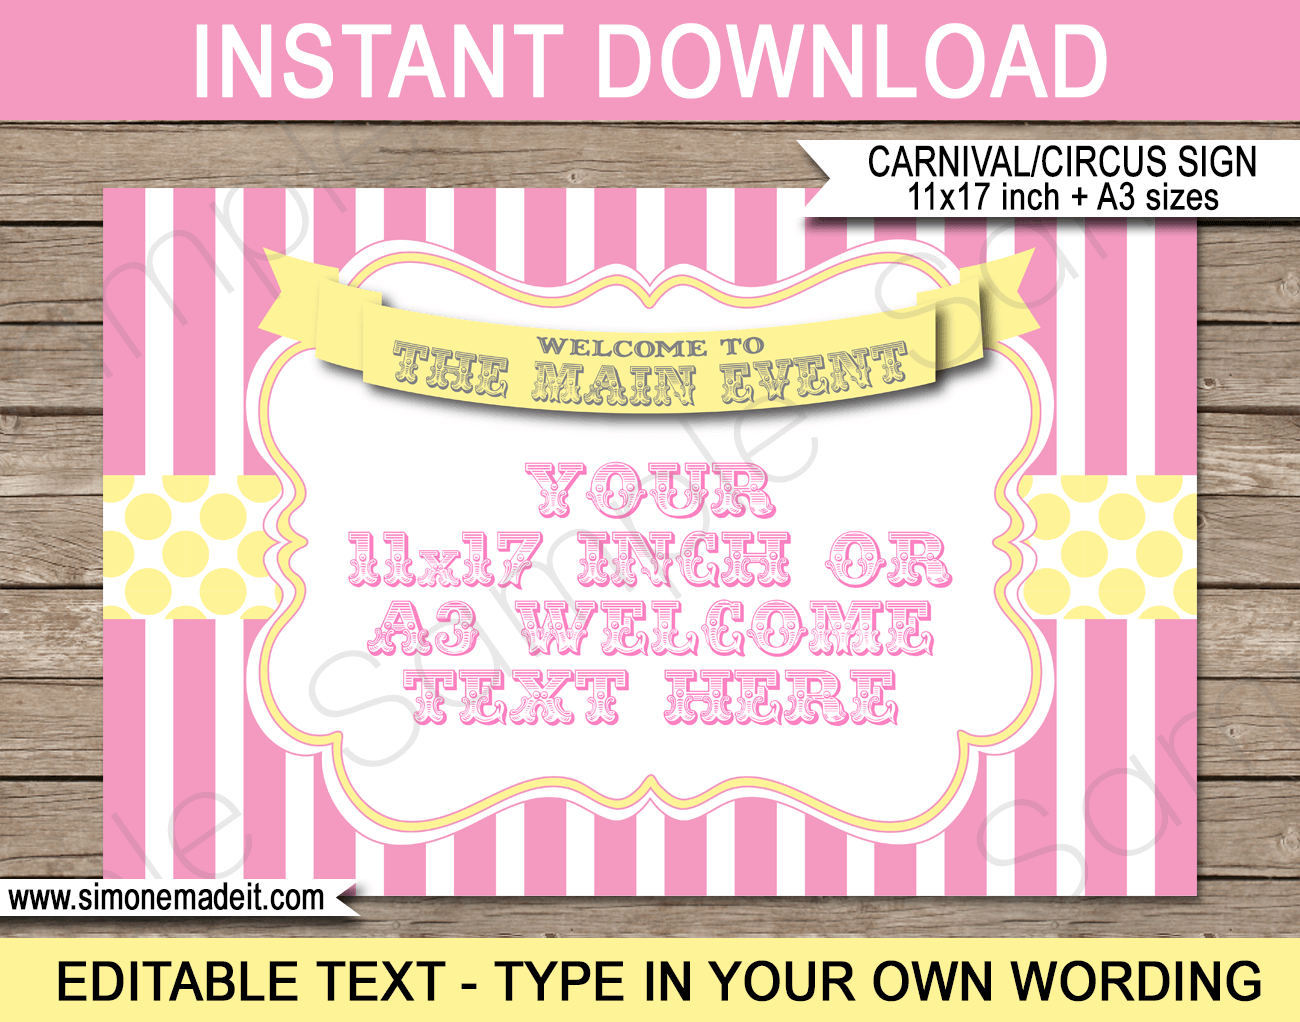 Printable Pink & Yellow Carnival Party Welcome Signs | Editable Text | DIY Template | Circus Theme Party Decorations | $4.00 Instant Download via SIMONEmadeit.com